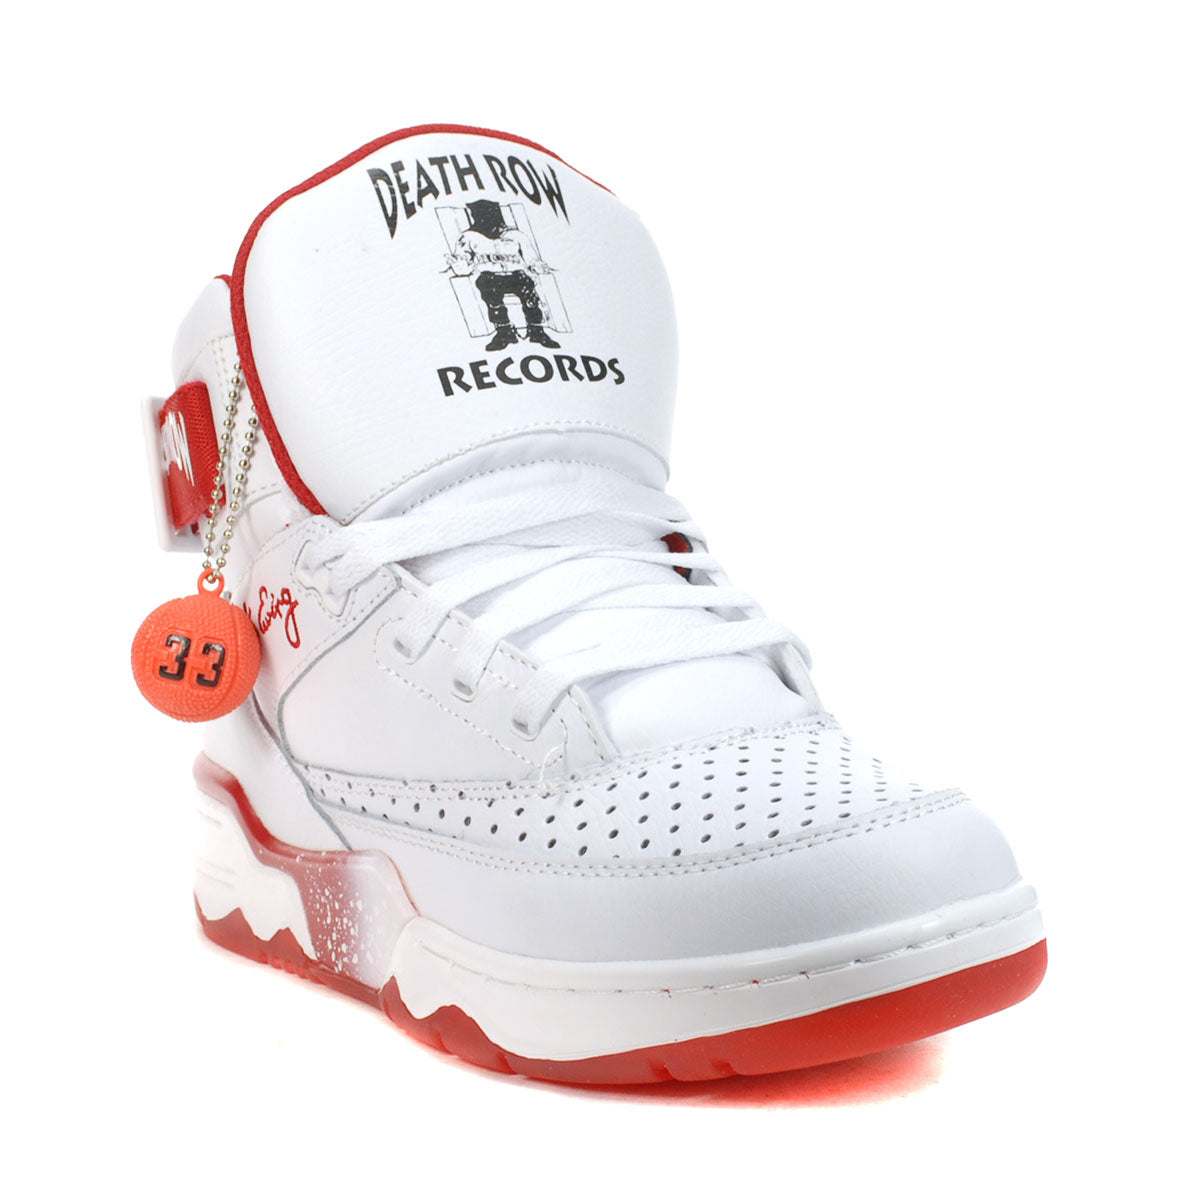 33 HI X DEATH ROW RECORDS WHITE/RED